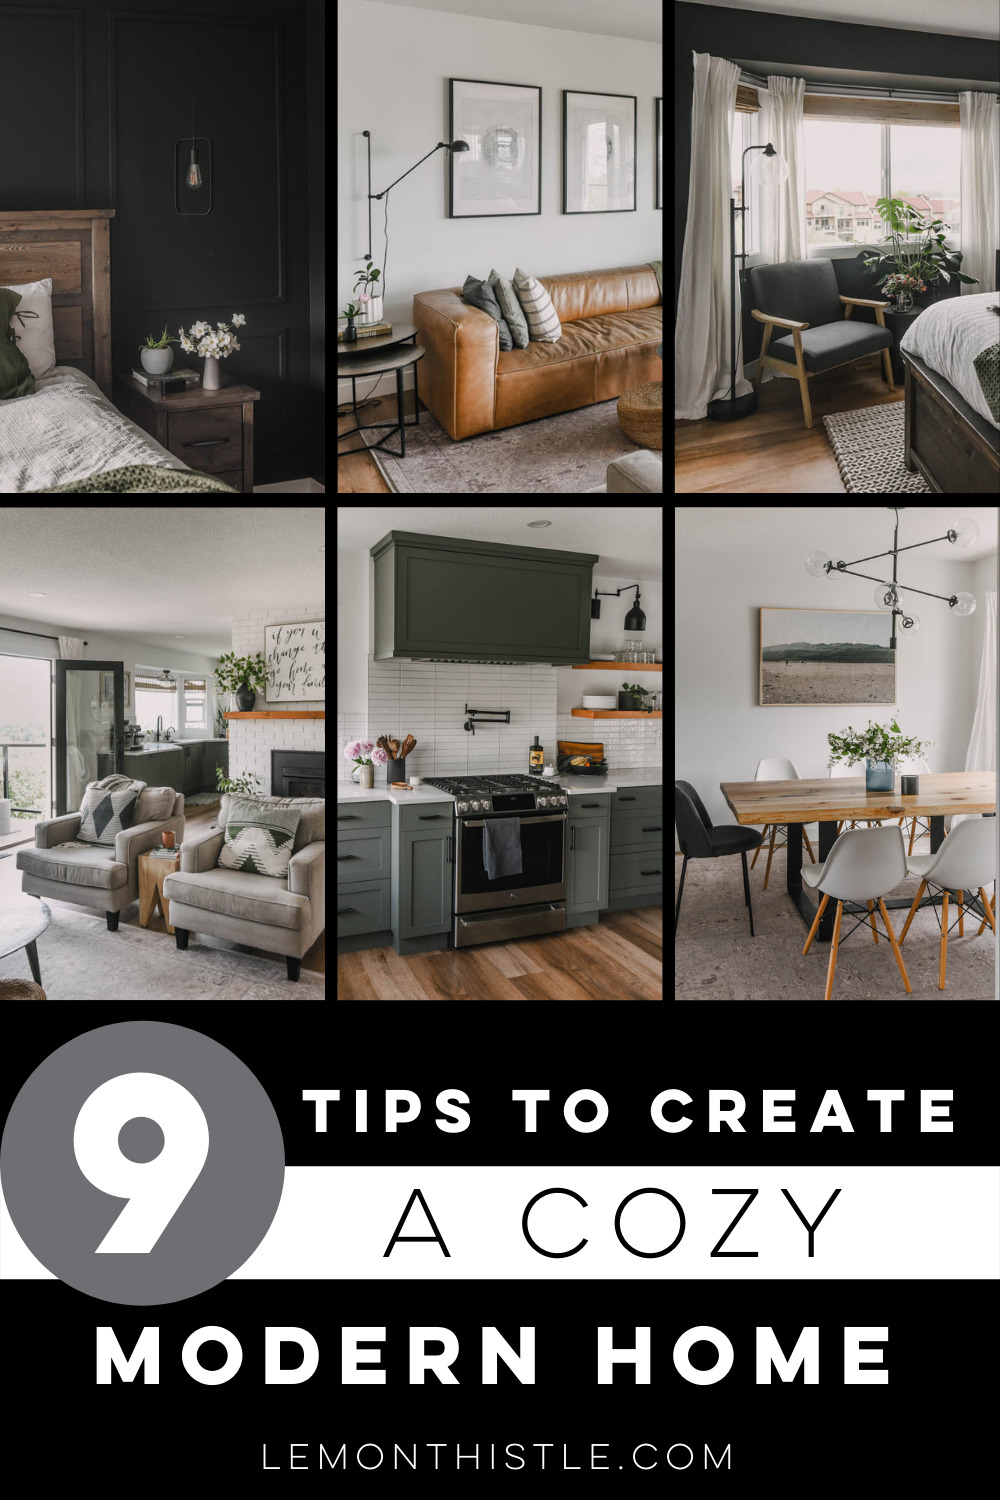 9 Tips to Create a Cozy Modern Home